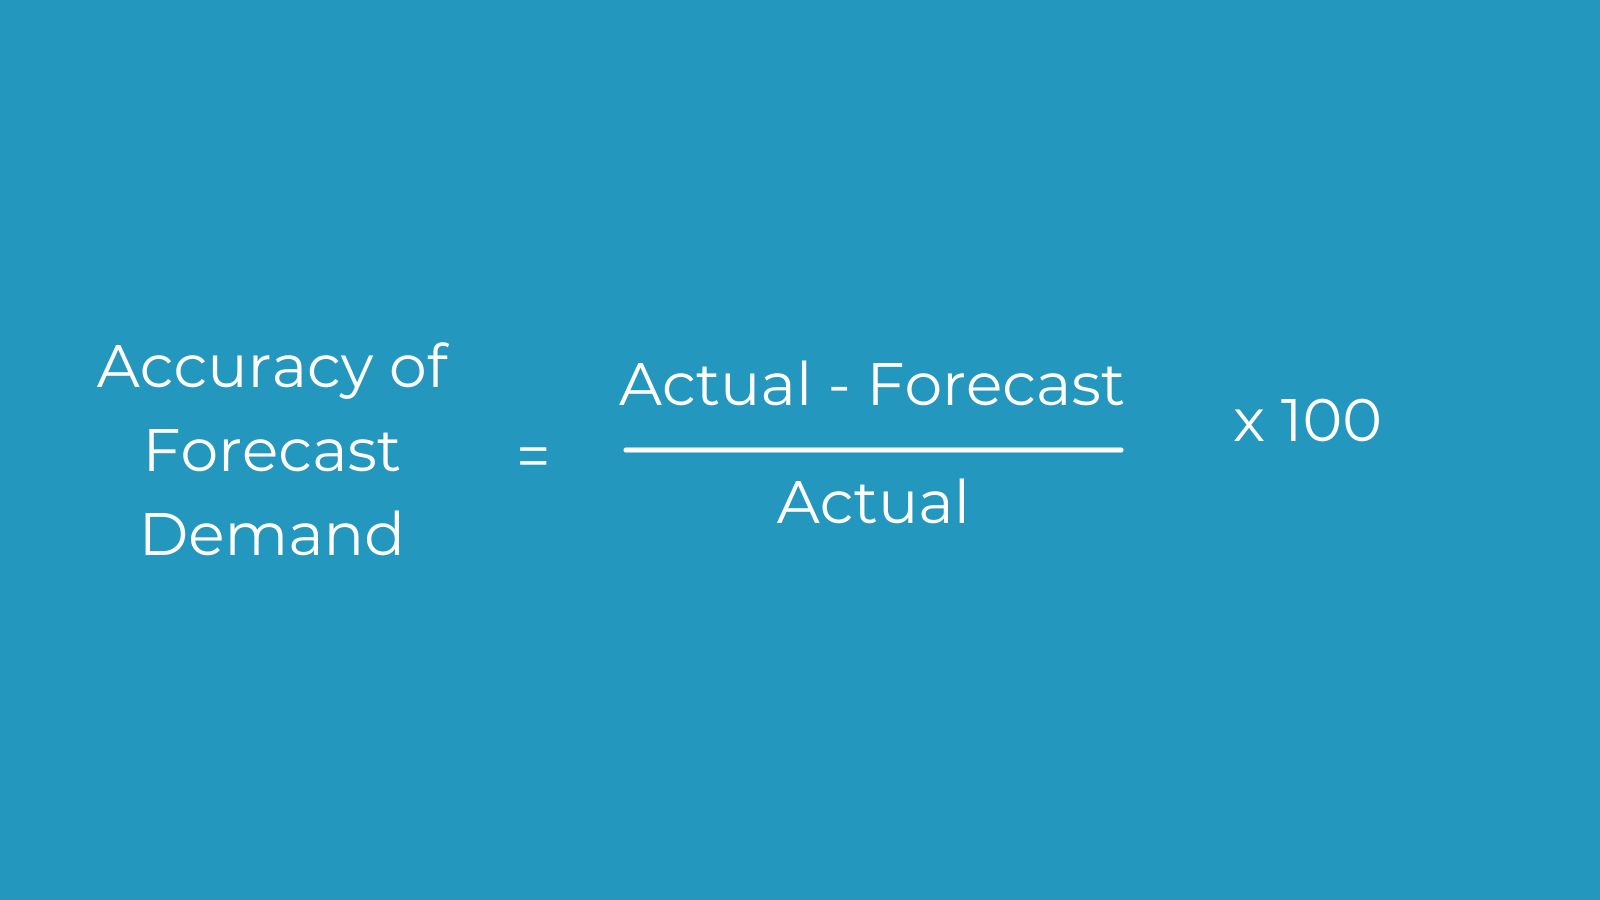 Accuracy of Forecast Demand